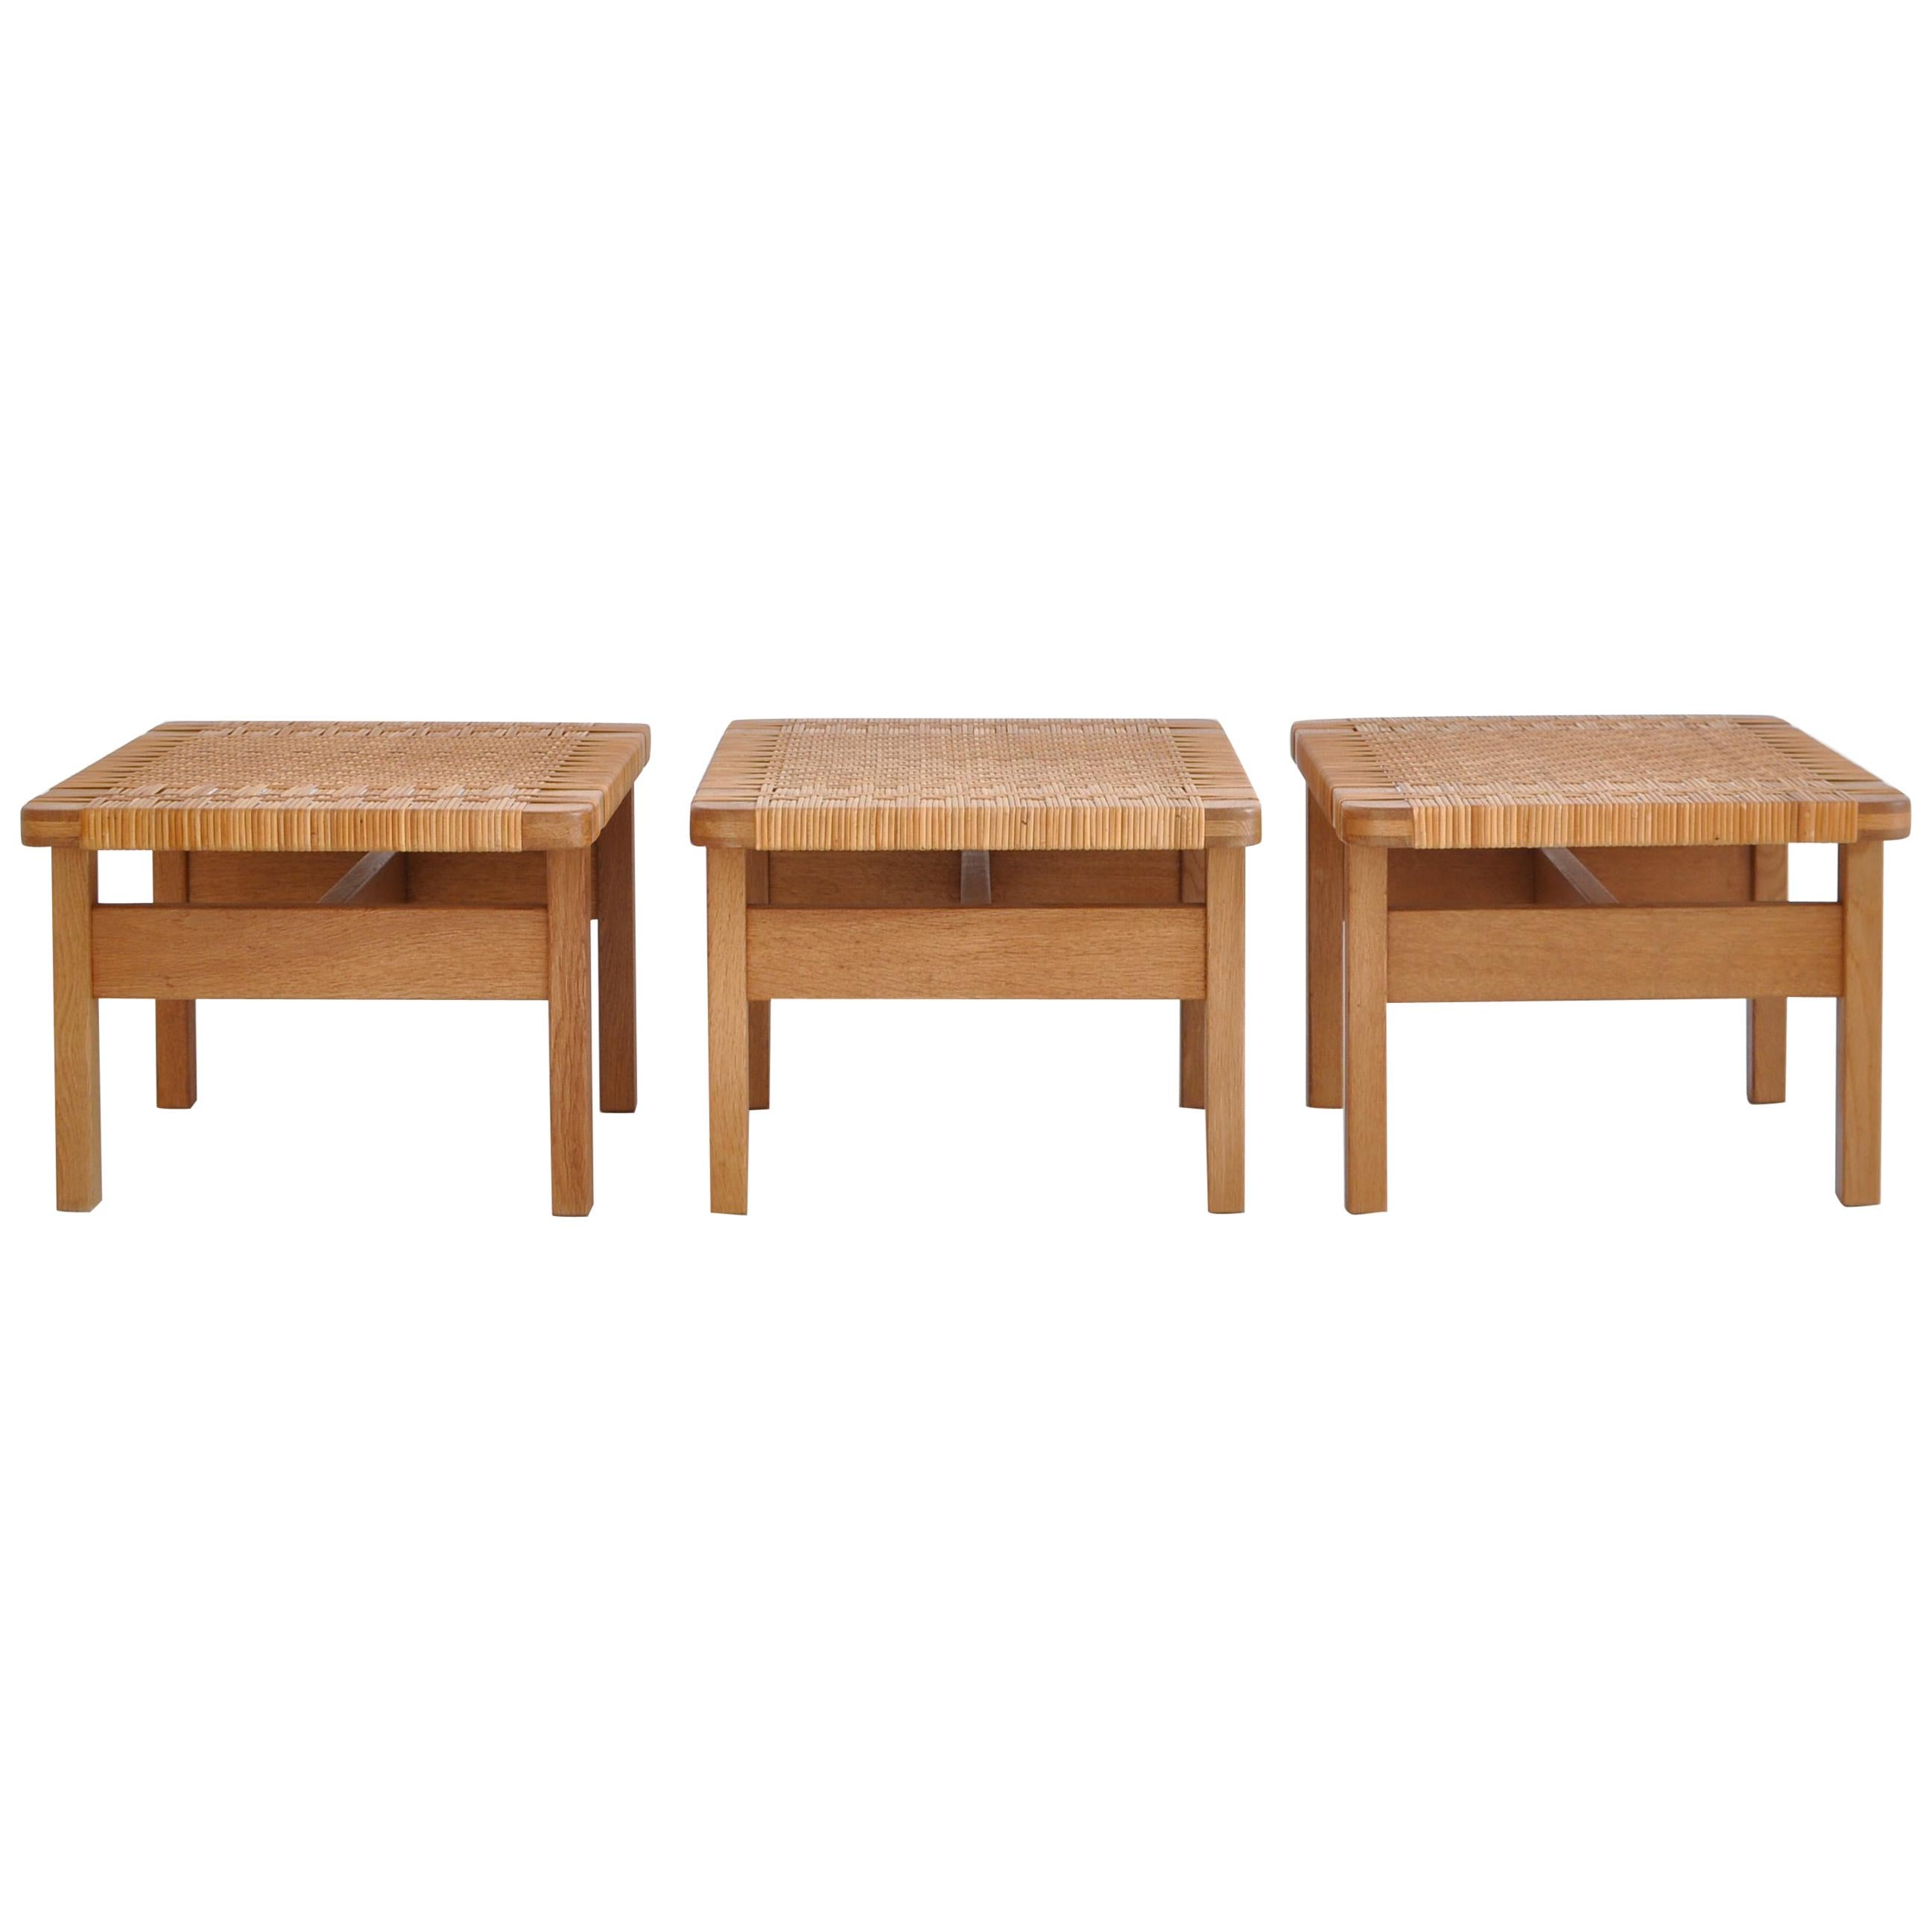 Borge Mogensen Side Tables or Benches in Oak and Rattan Cane, 1950s, Denmark